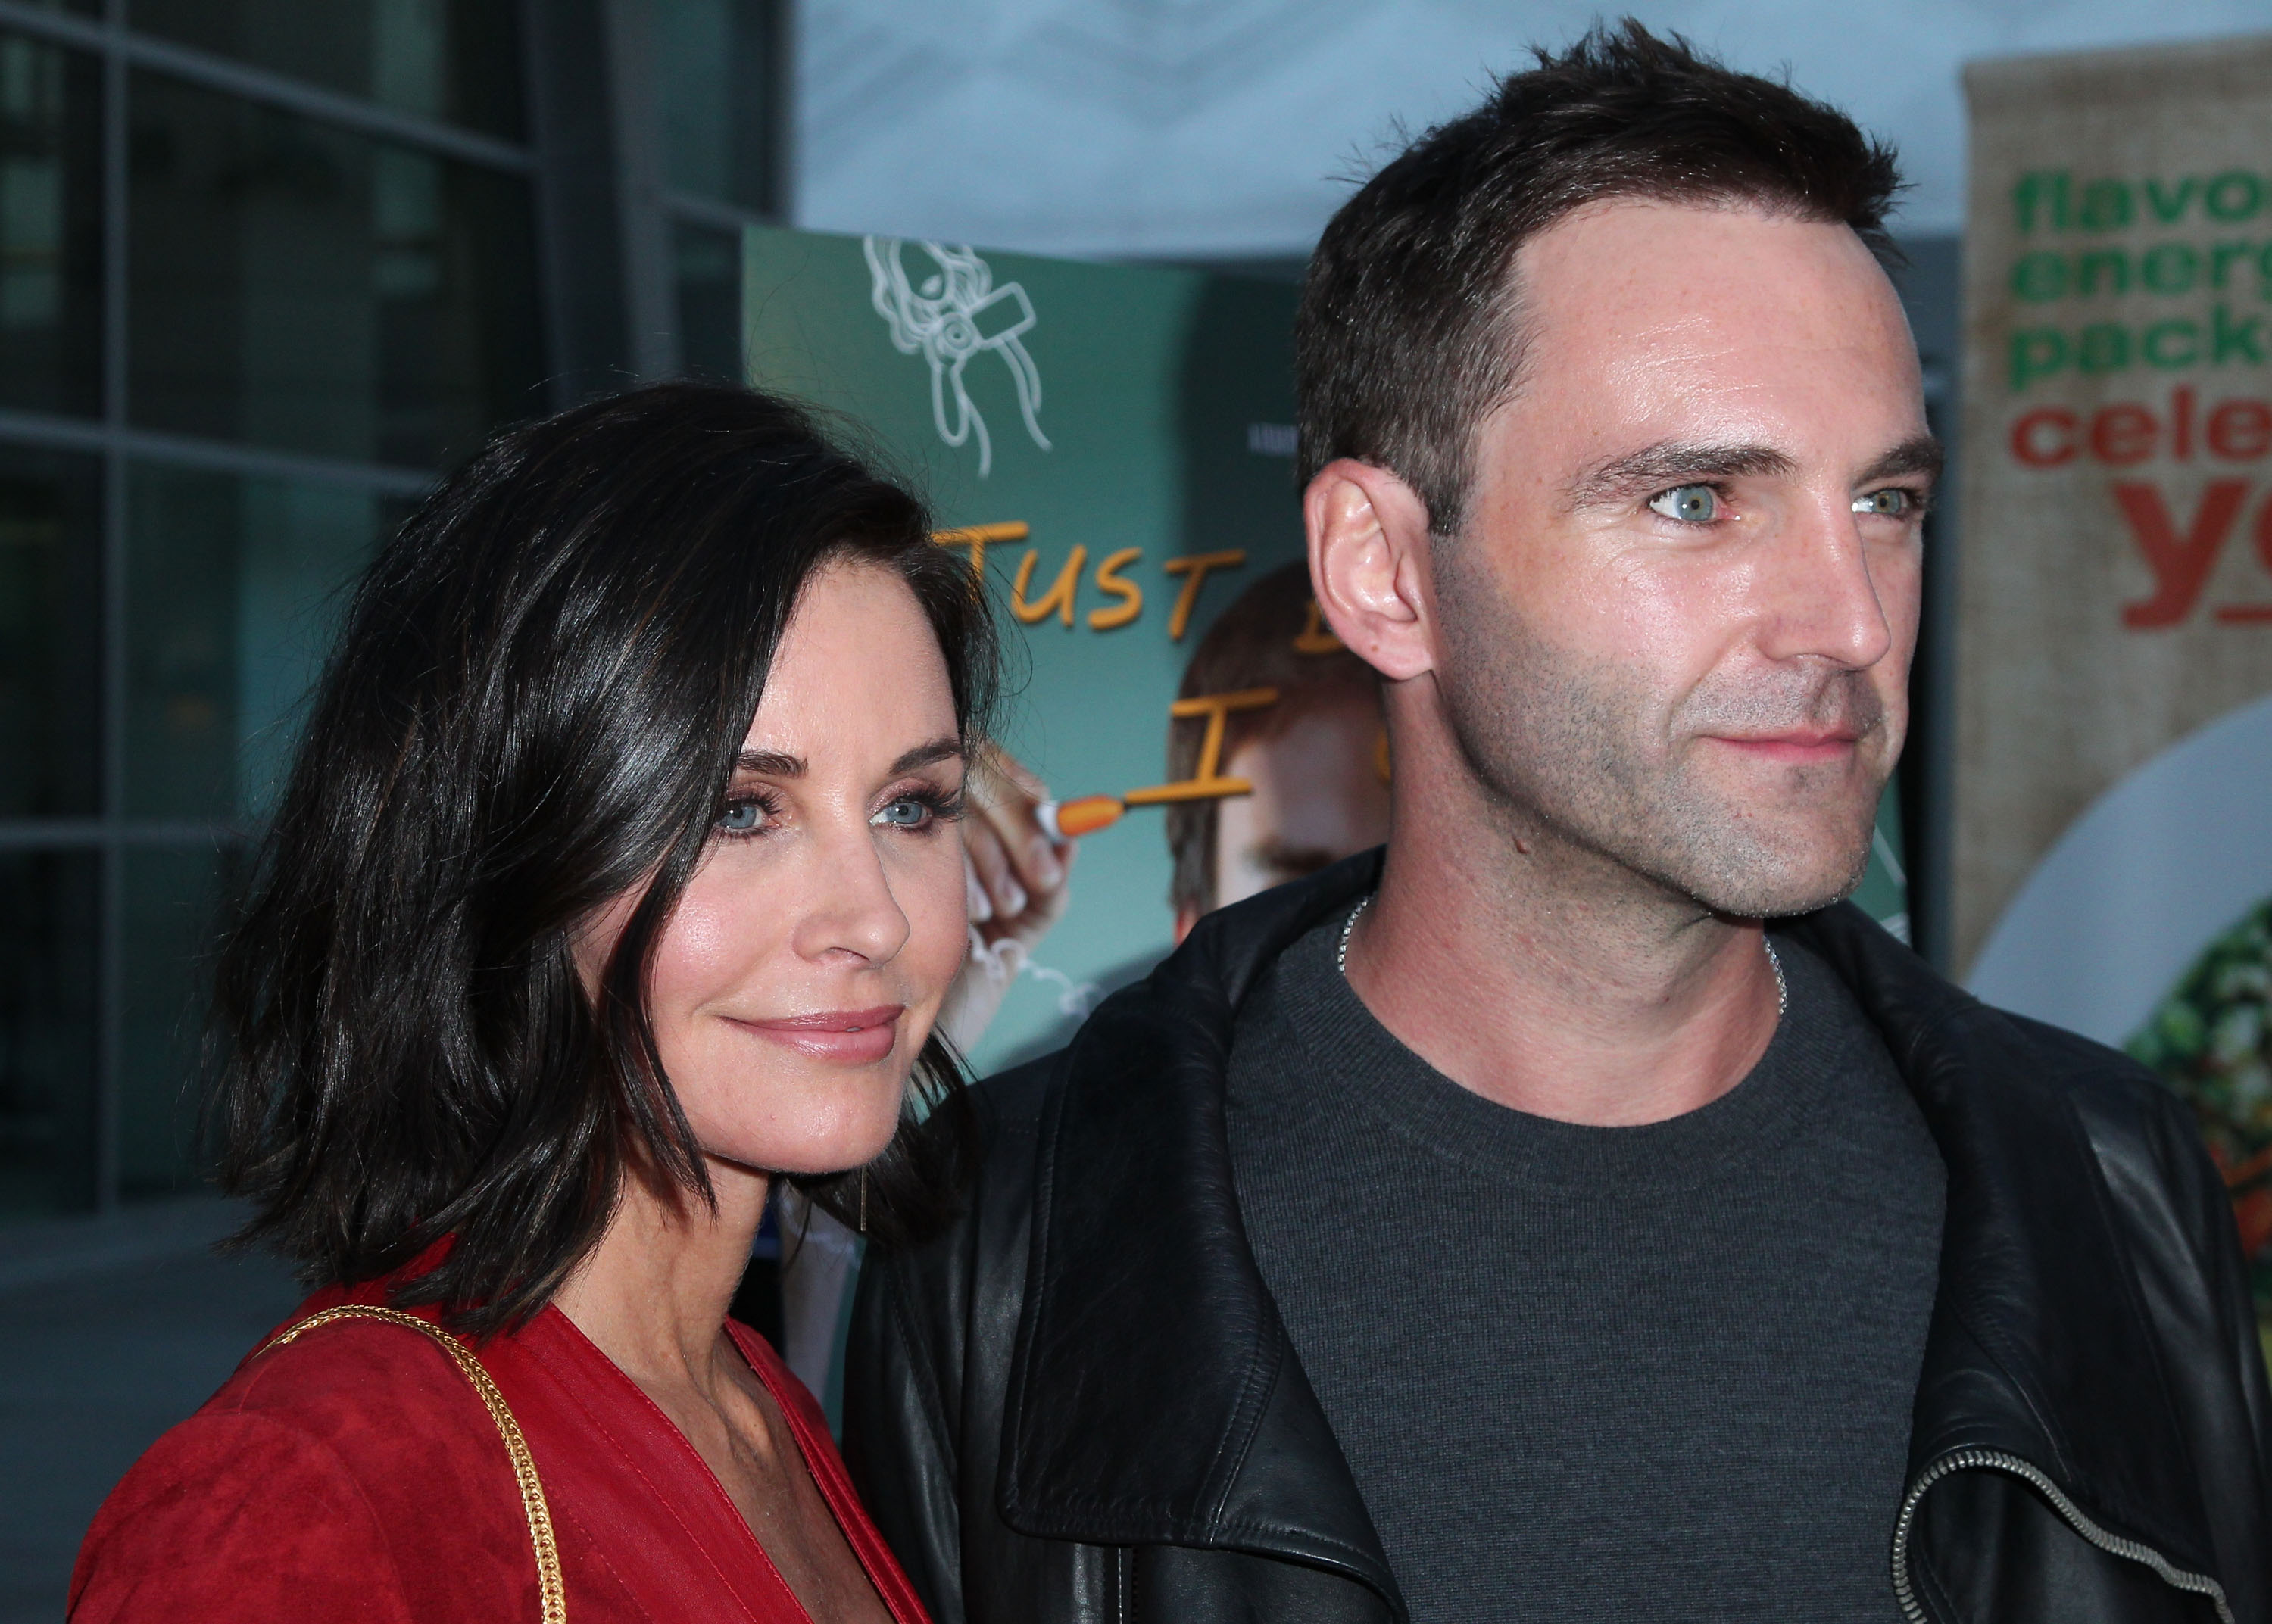 HOLLYWOOD, CA - APRIL 20: Actress/director Courteney Cox (L) and songwritwer Johnny McDaid attends the screening of Anchor Bay Entertainments Just Before I Go at ArcLight Hollywood on April 20, 2015 in Hollywood, California. (Photo by David Buchan/Getty Images)